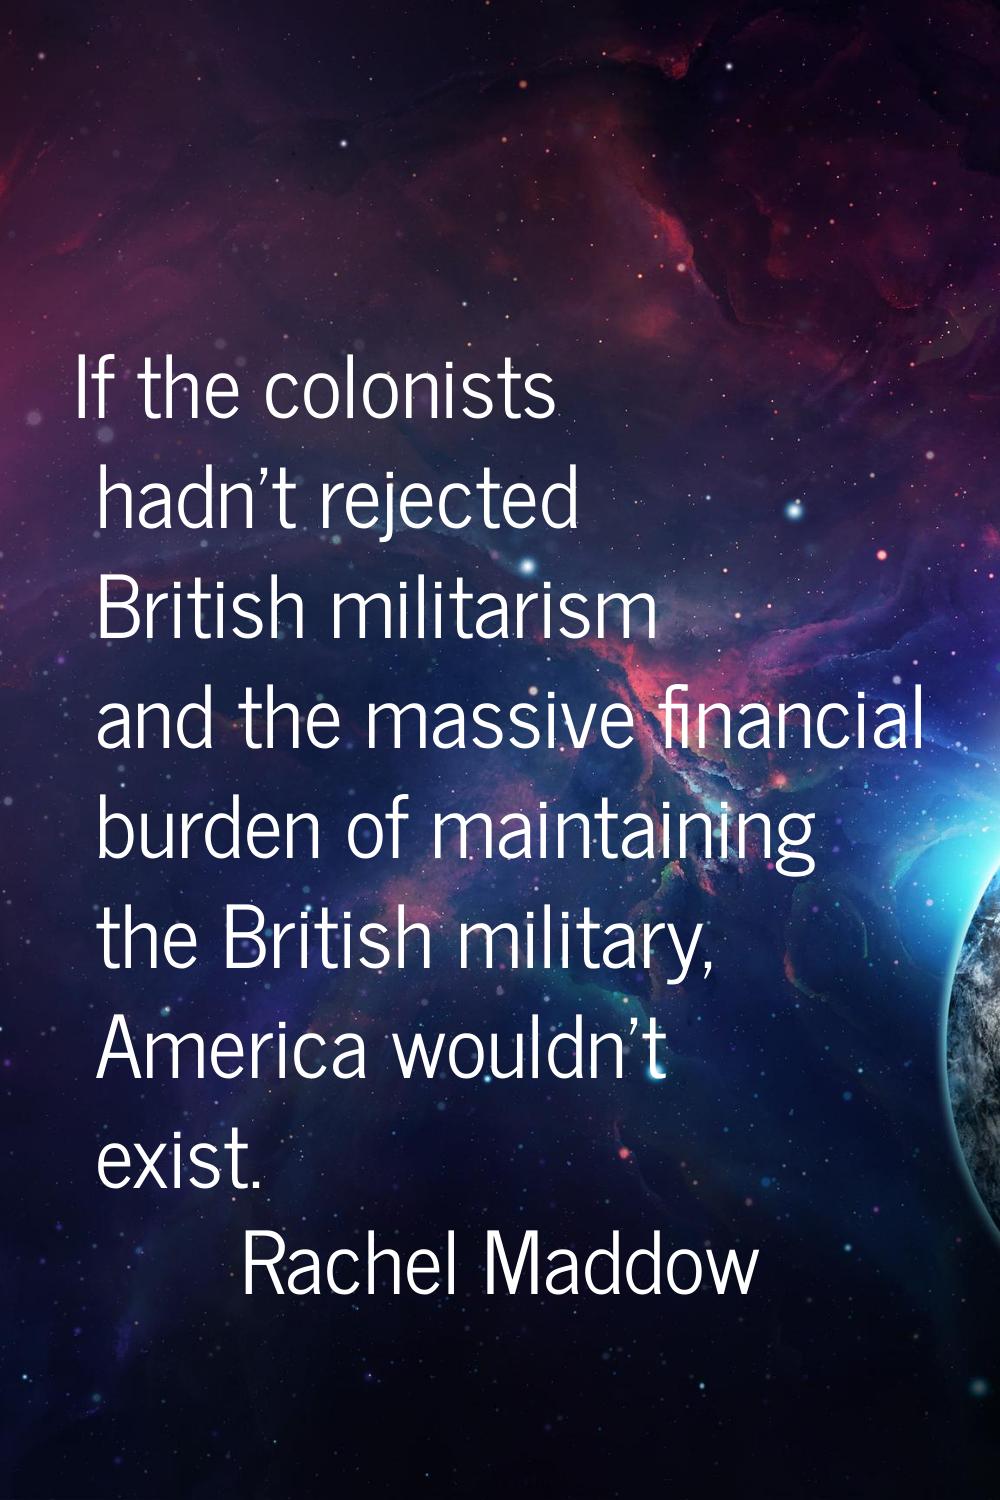 If the colonists hadn't rejected British militarism and the massive financial burden of maintaining